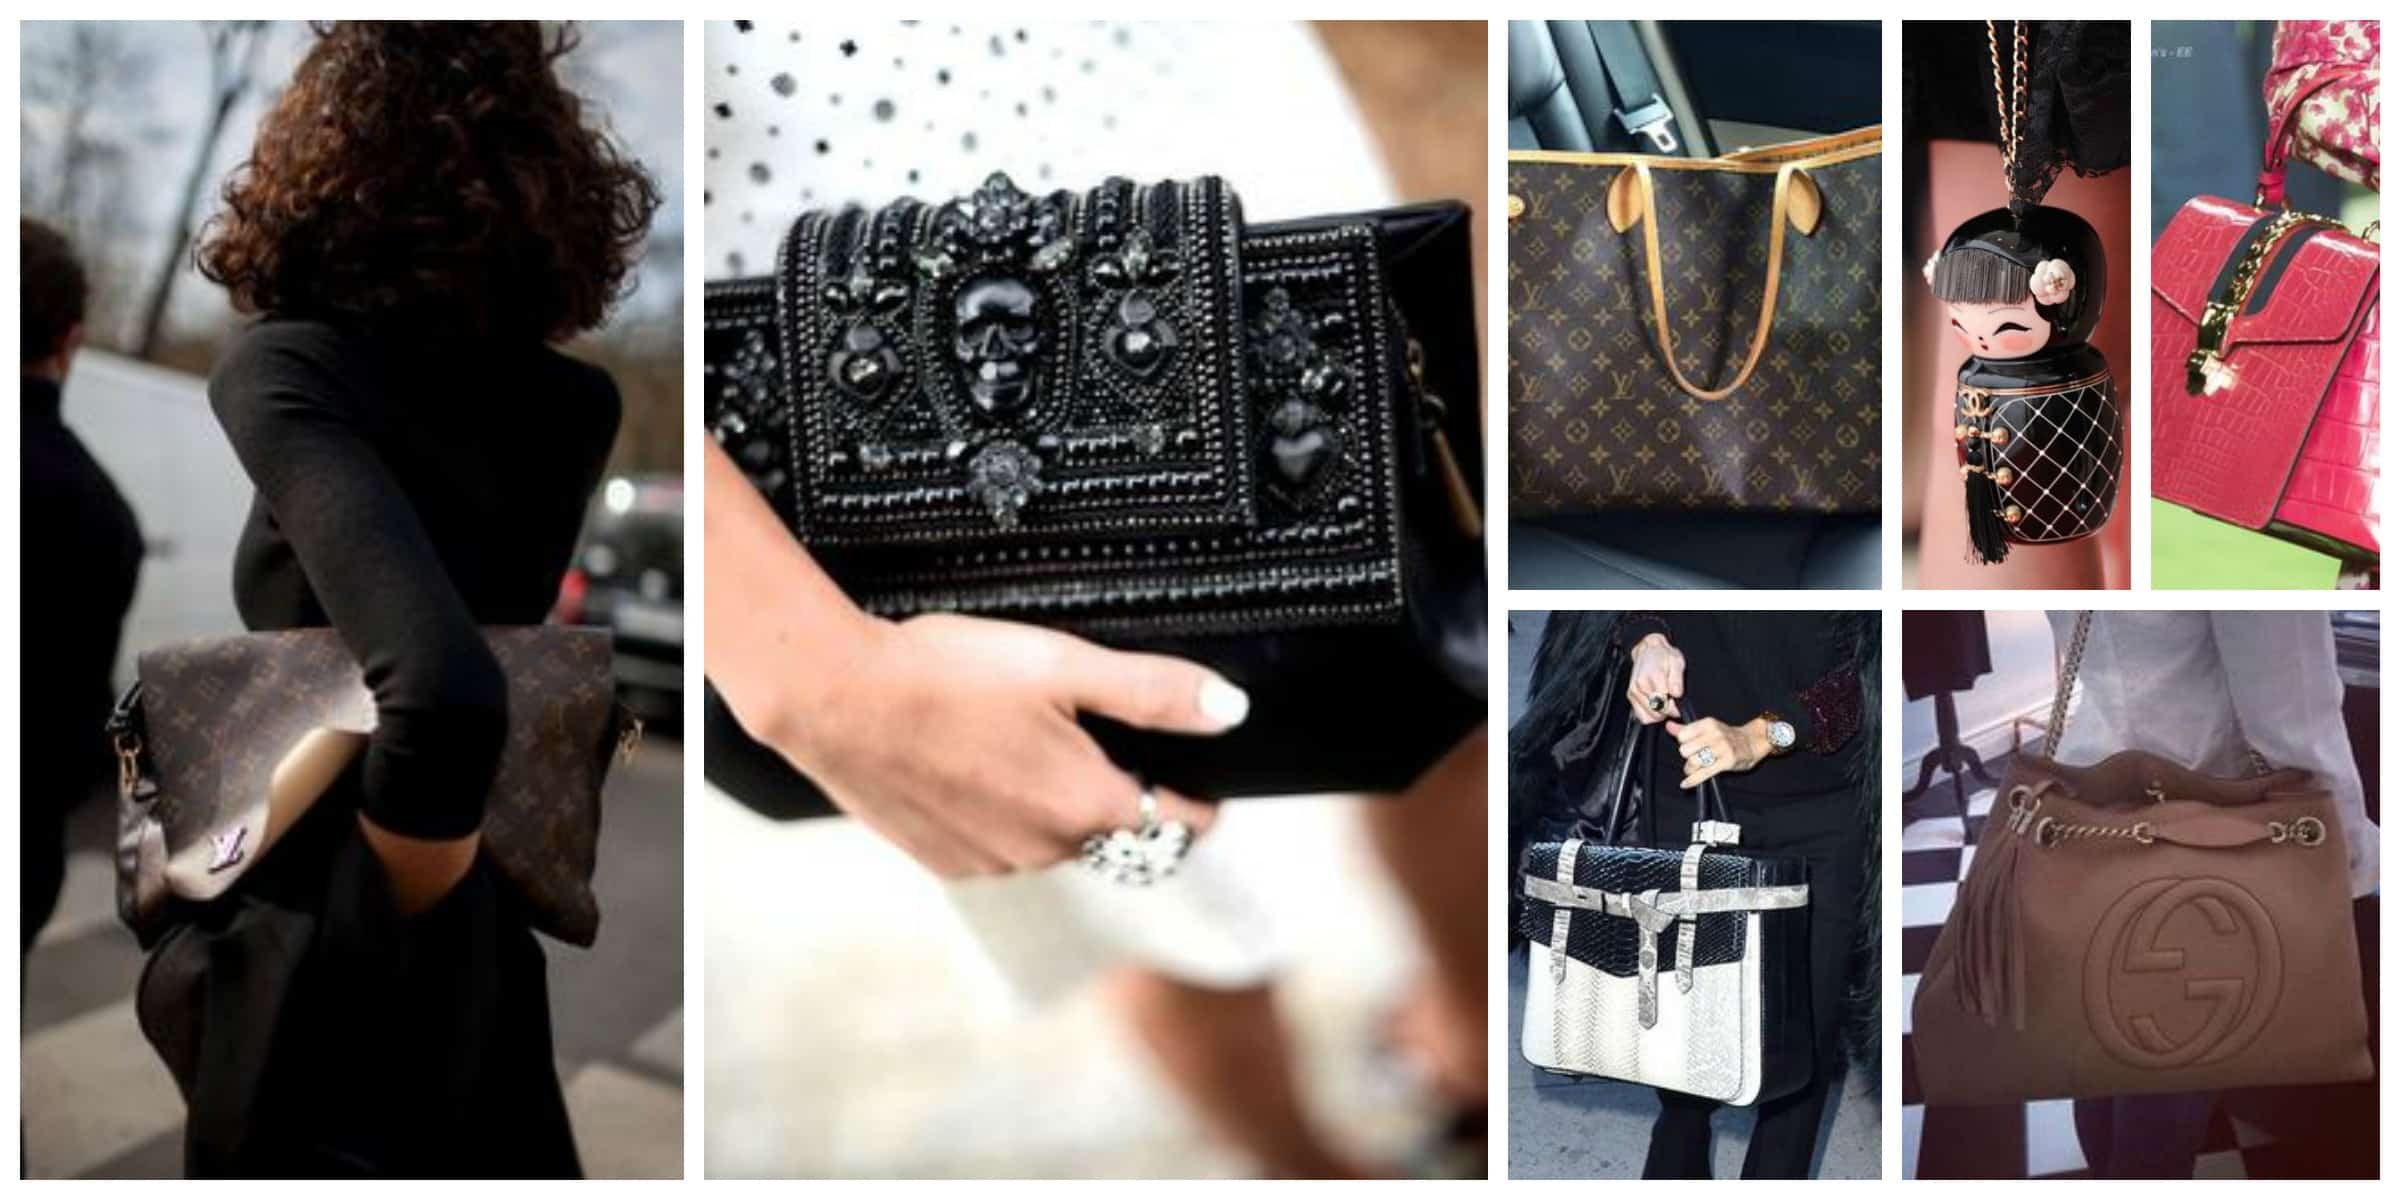 Replica Handbags - Quality at the Best Price? - The Fashion Tag Blog